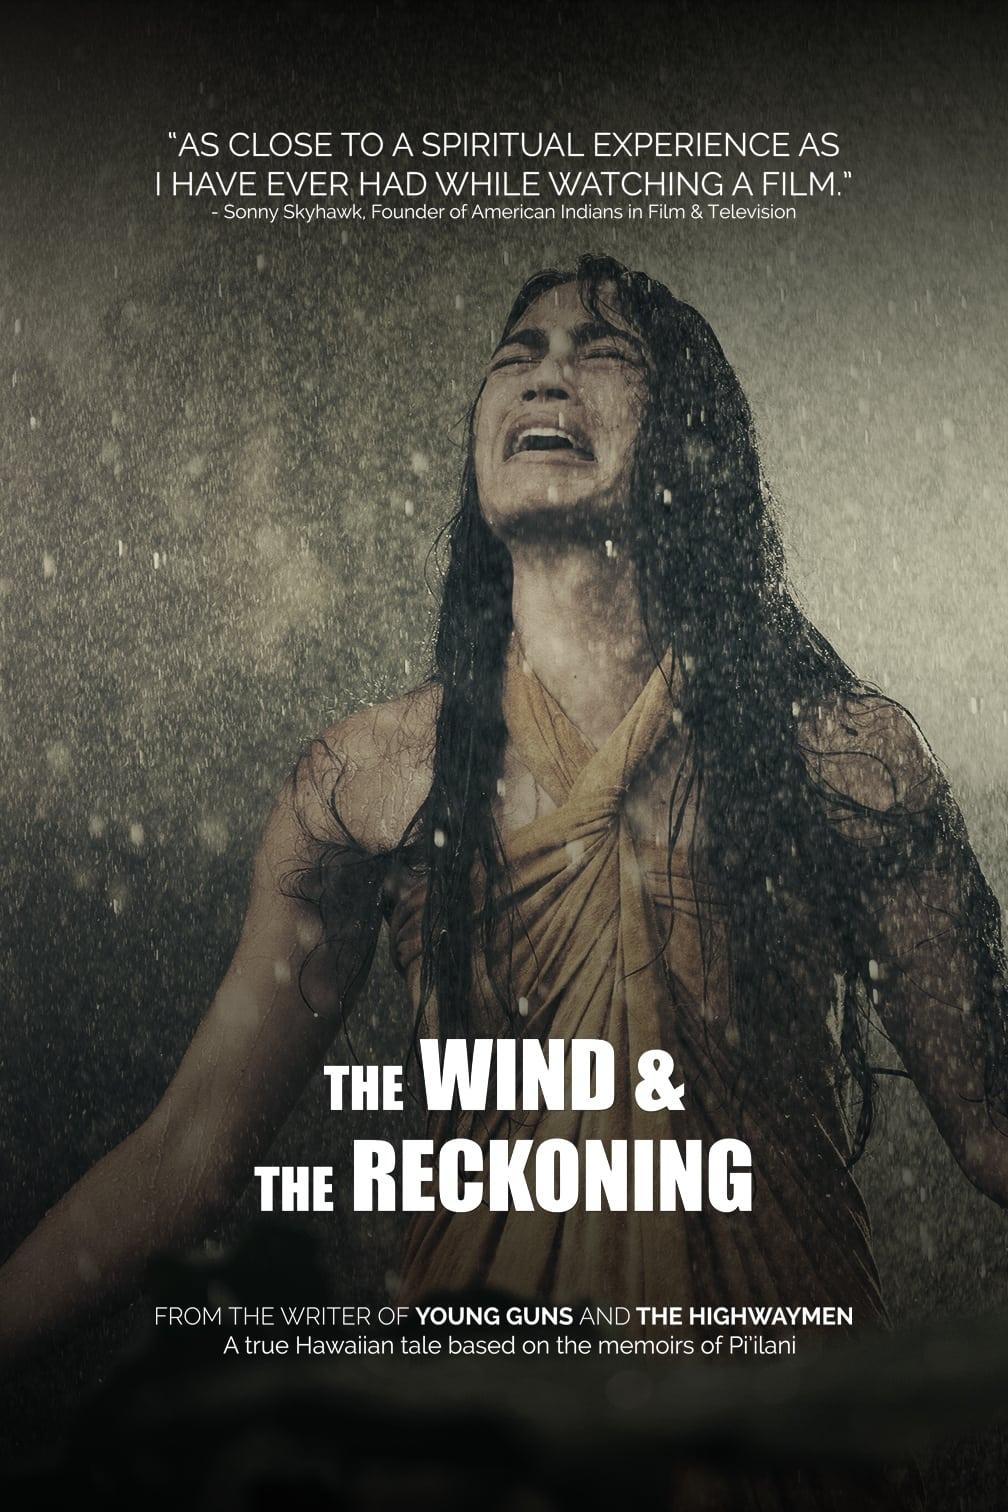 The Wind & the Reckoning poster